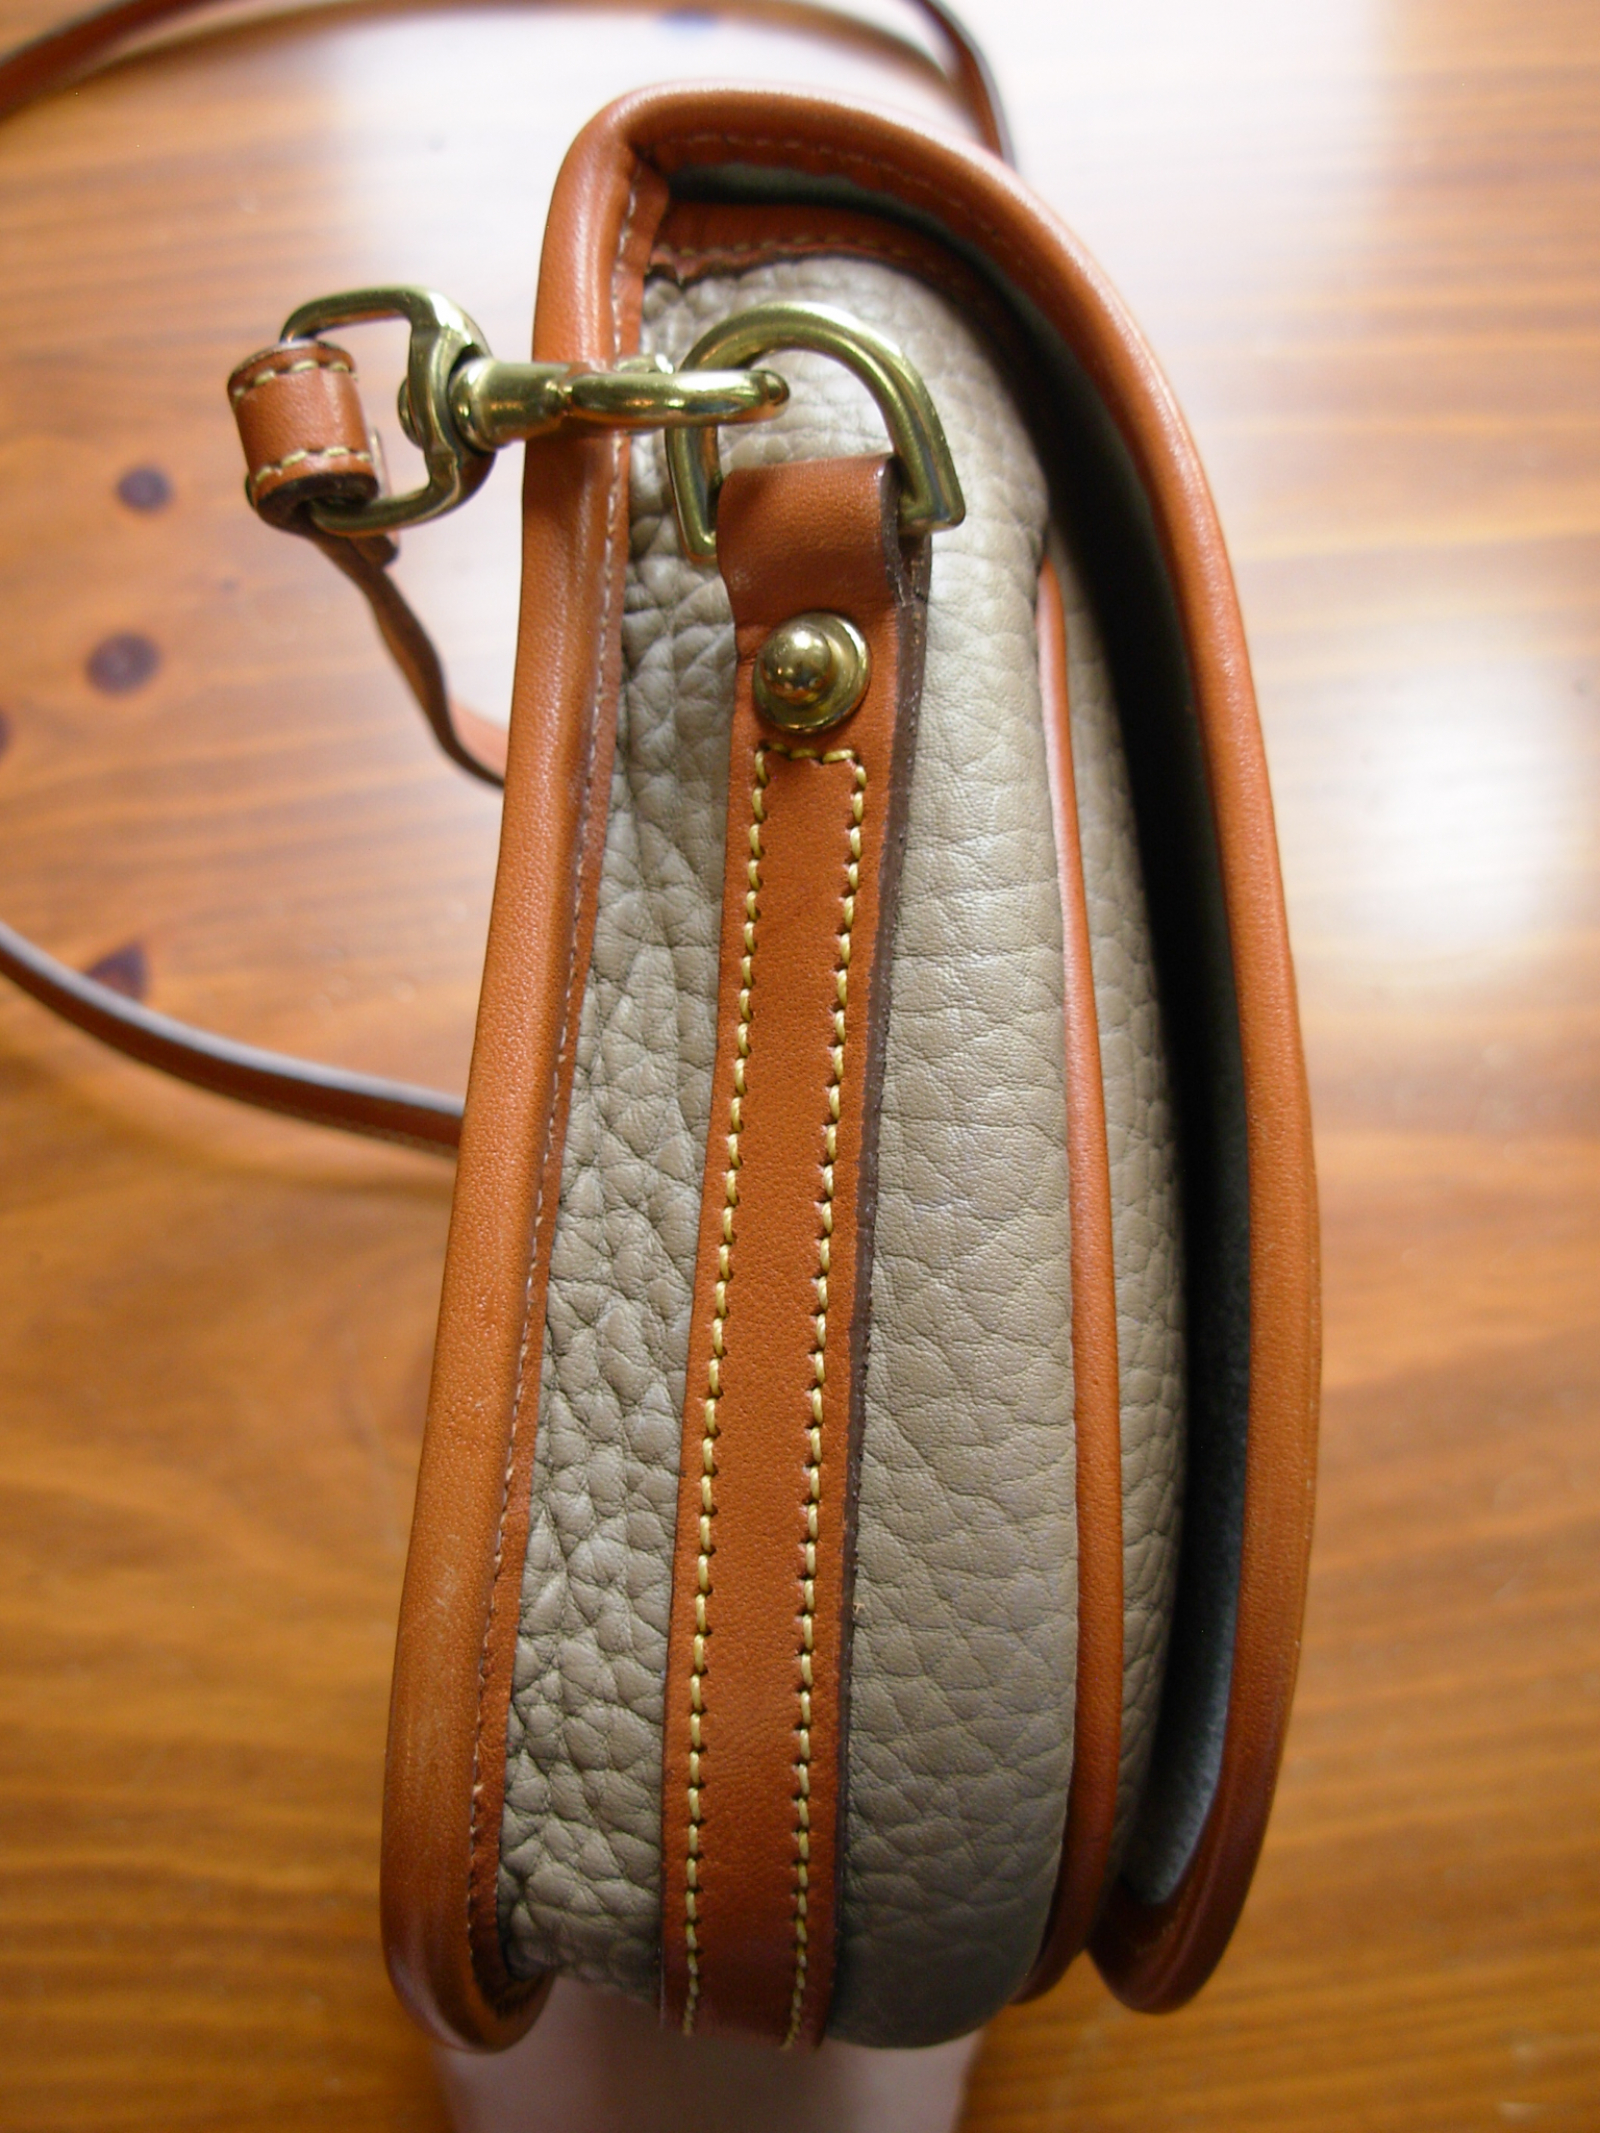 80's Dooney and Bourke over and under taupe crossbody purse